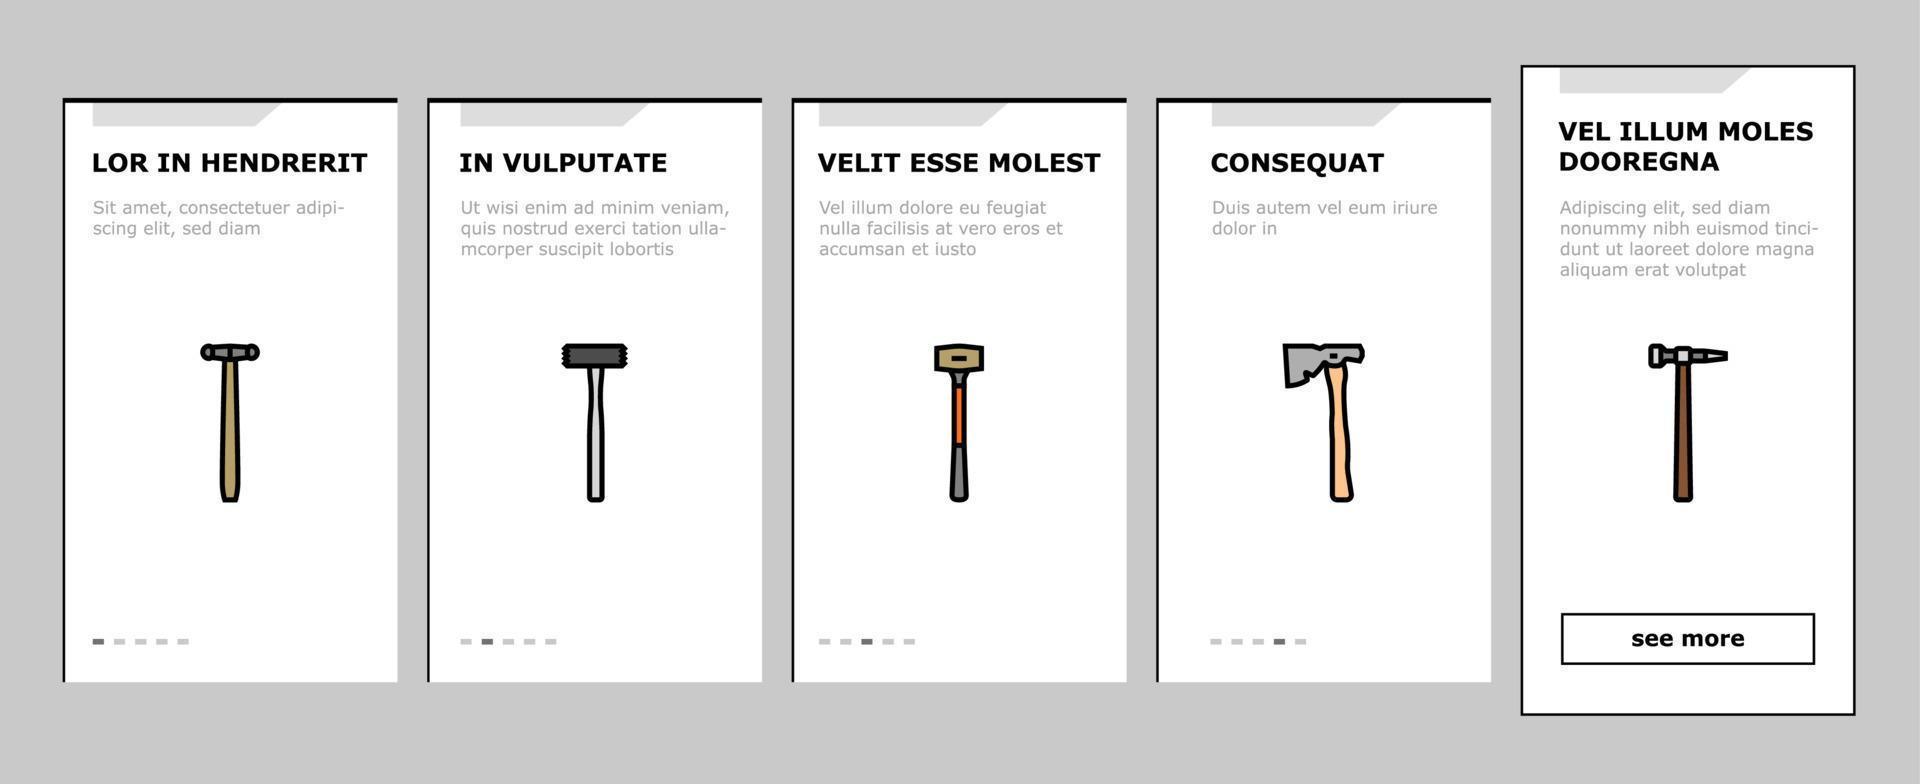 hammer tool construction onboarding icons set vector